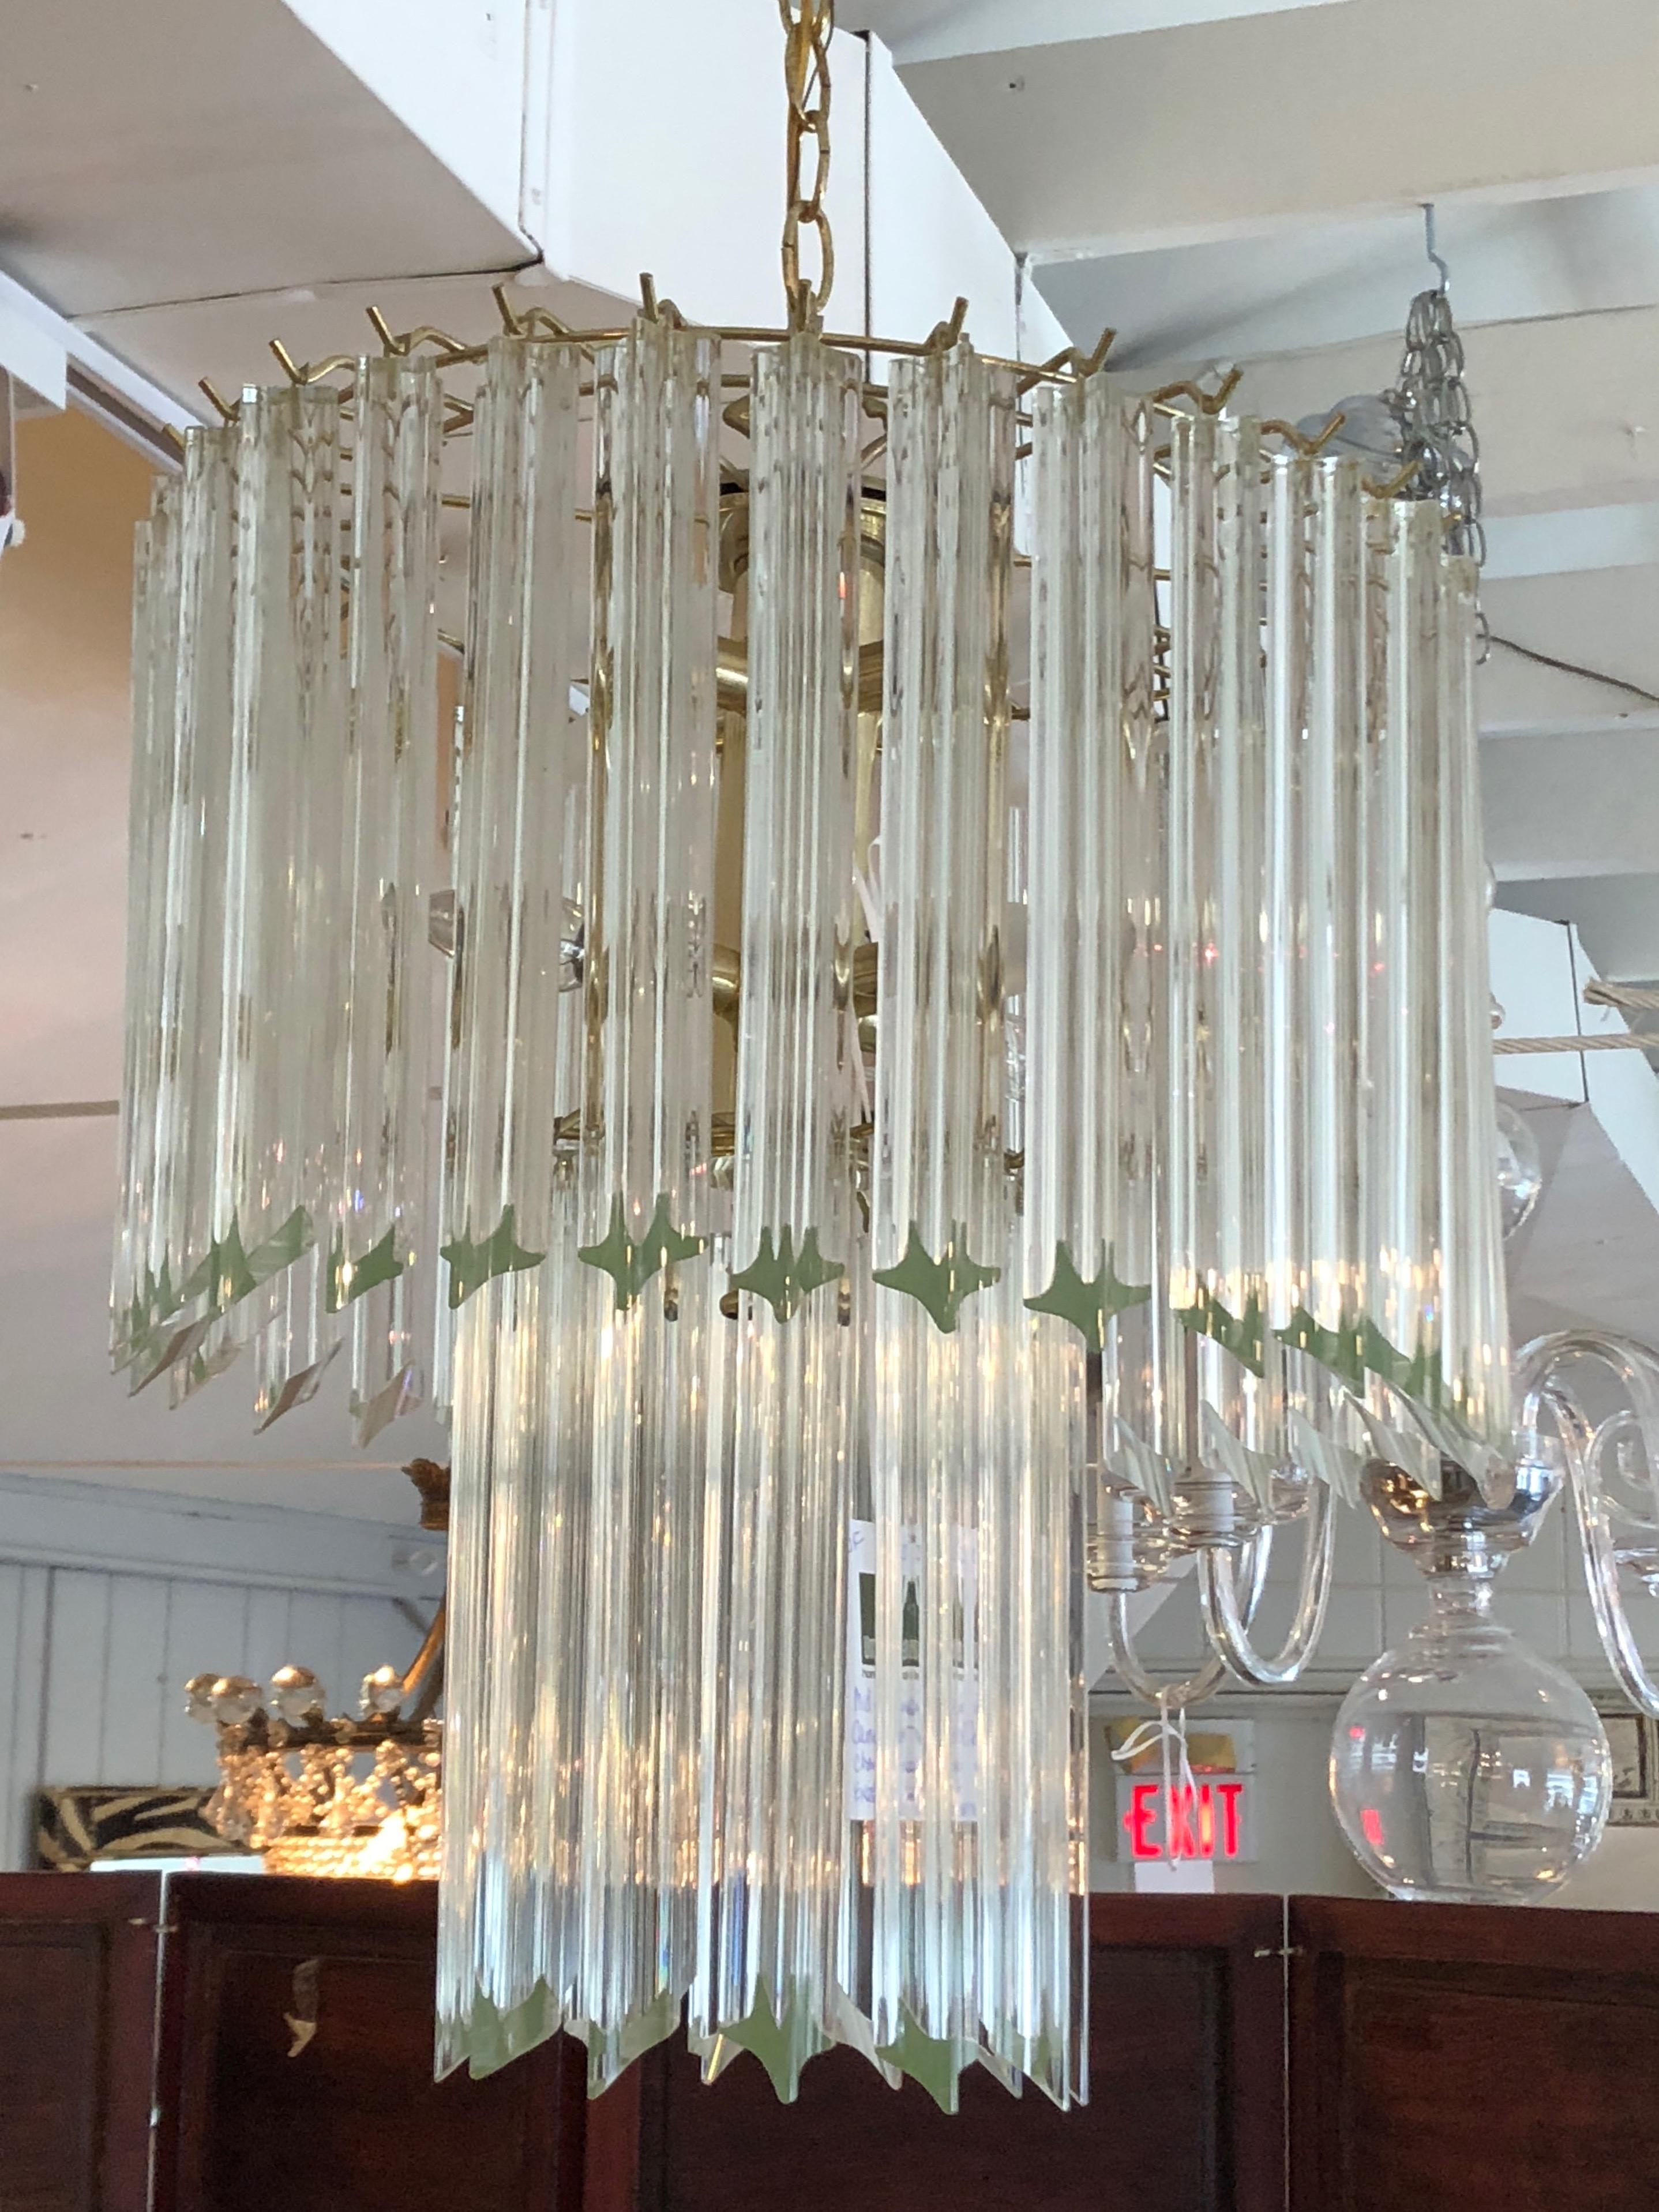 Iconic drippy Venini style chandelier by Camer having multiple chunky sculpted bars of crystal in elongated tiers, 9 sockets in all. Fixture itself is about 22 inches tall.